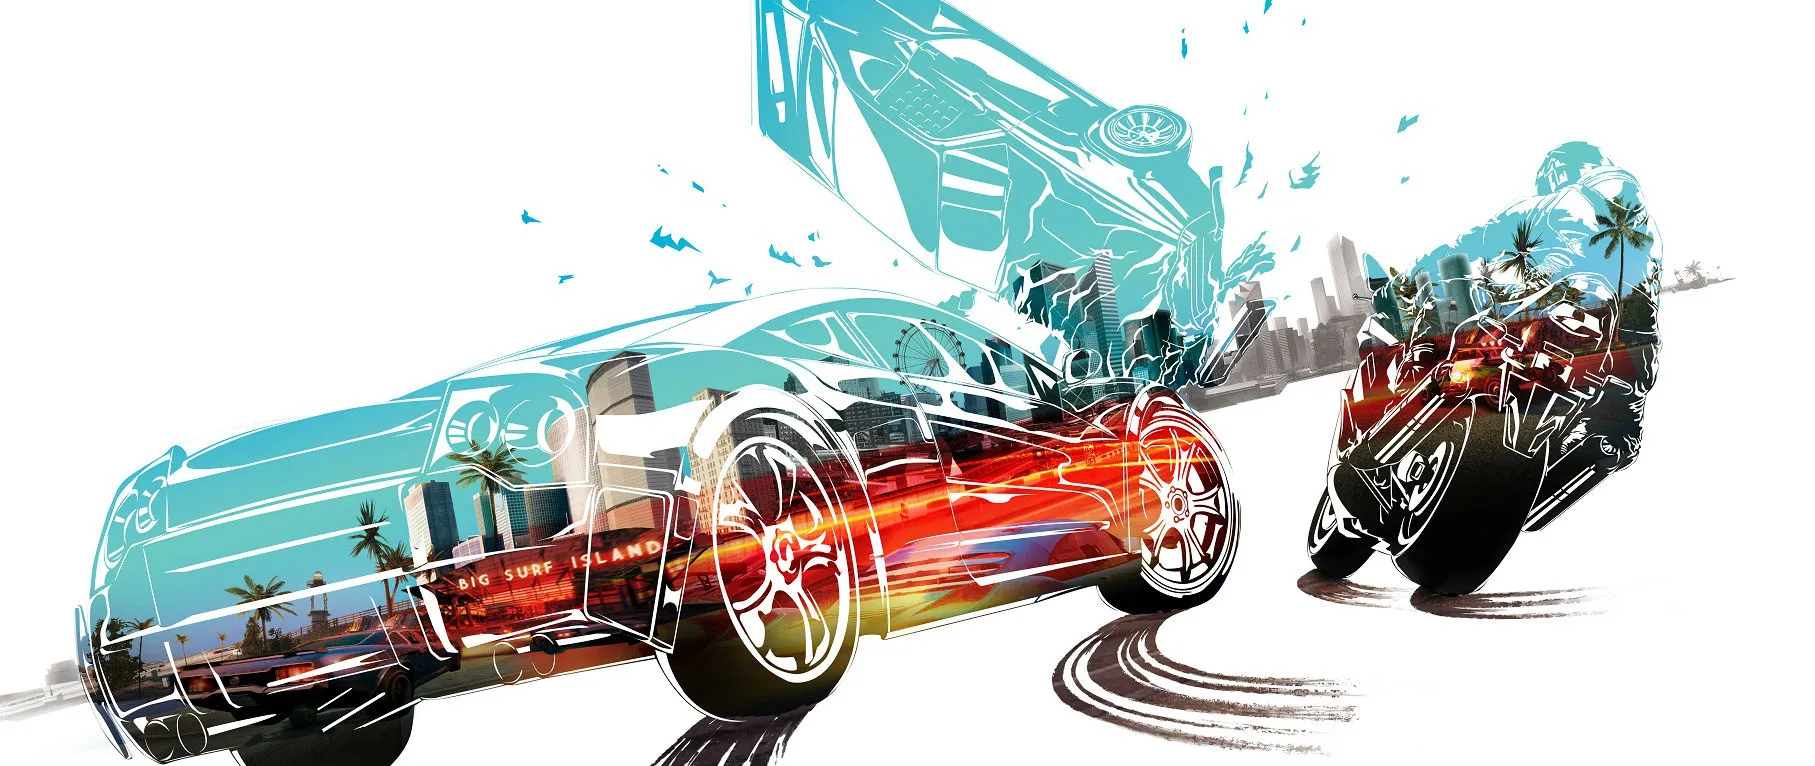 Burnout Paradise Remastered hits consoles in March (update) - Polygon